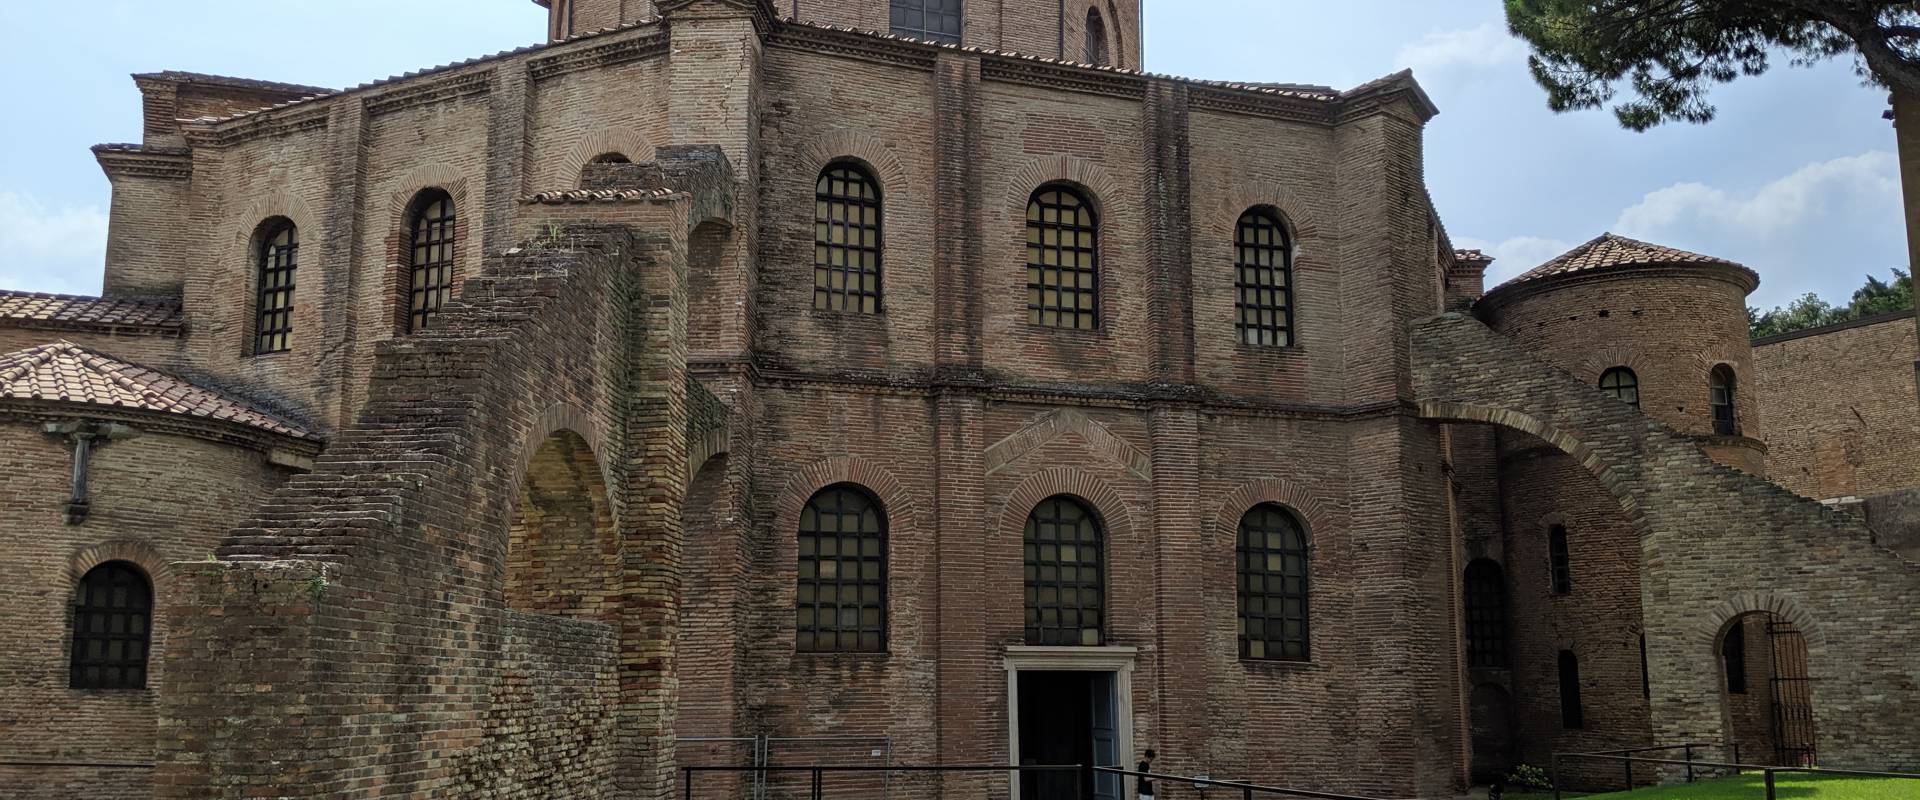 San Vitale Exterior View 2 photo by Conor Manley